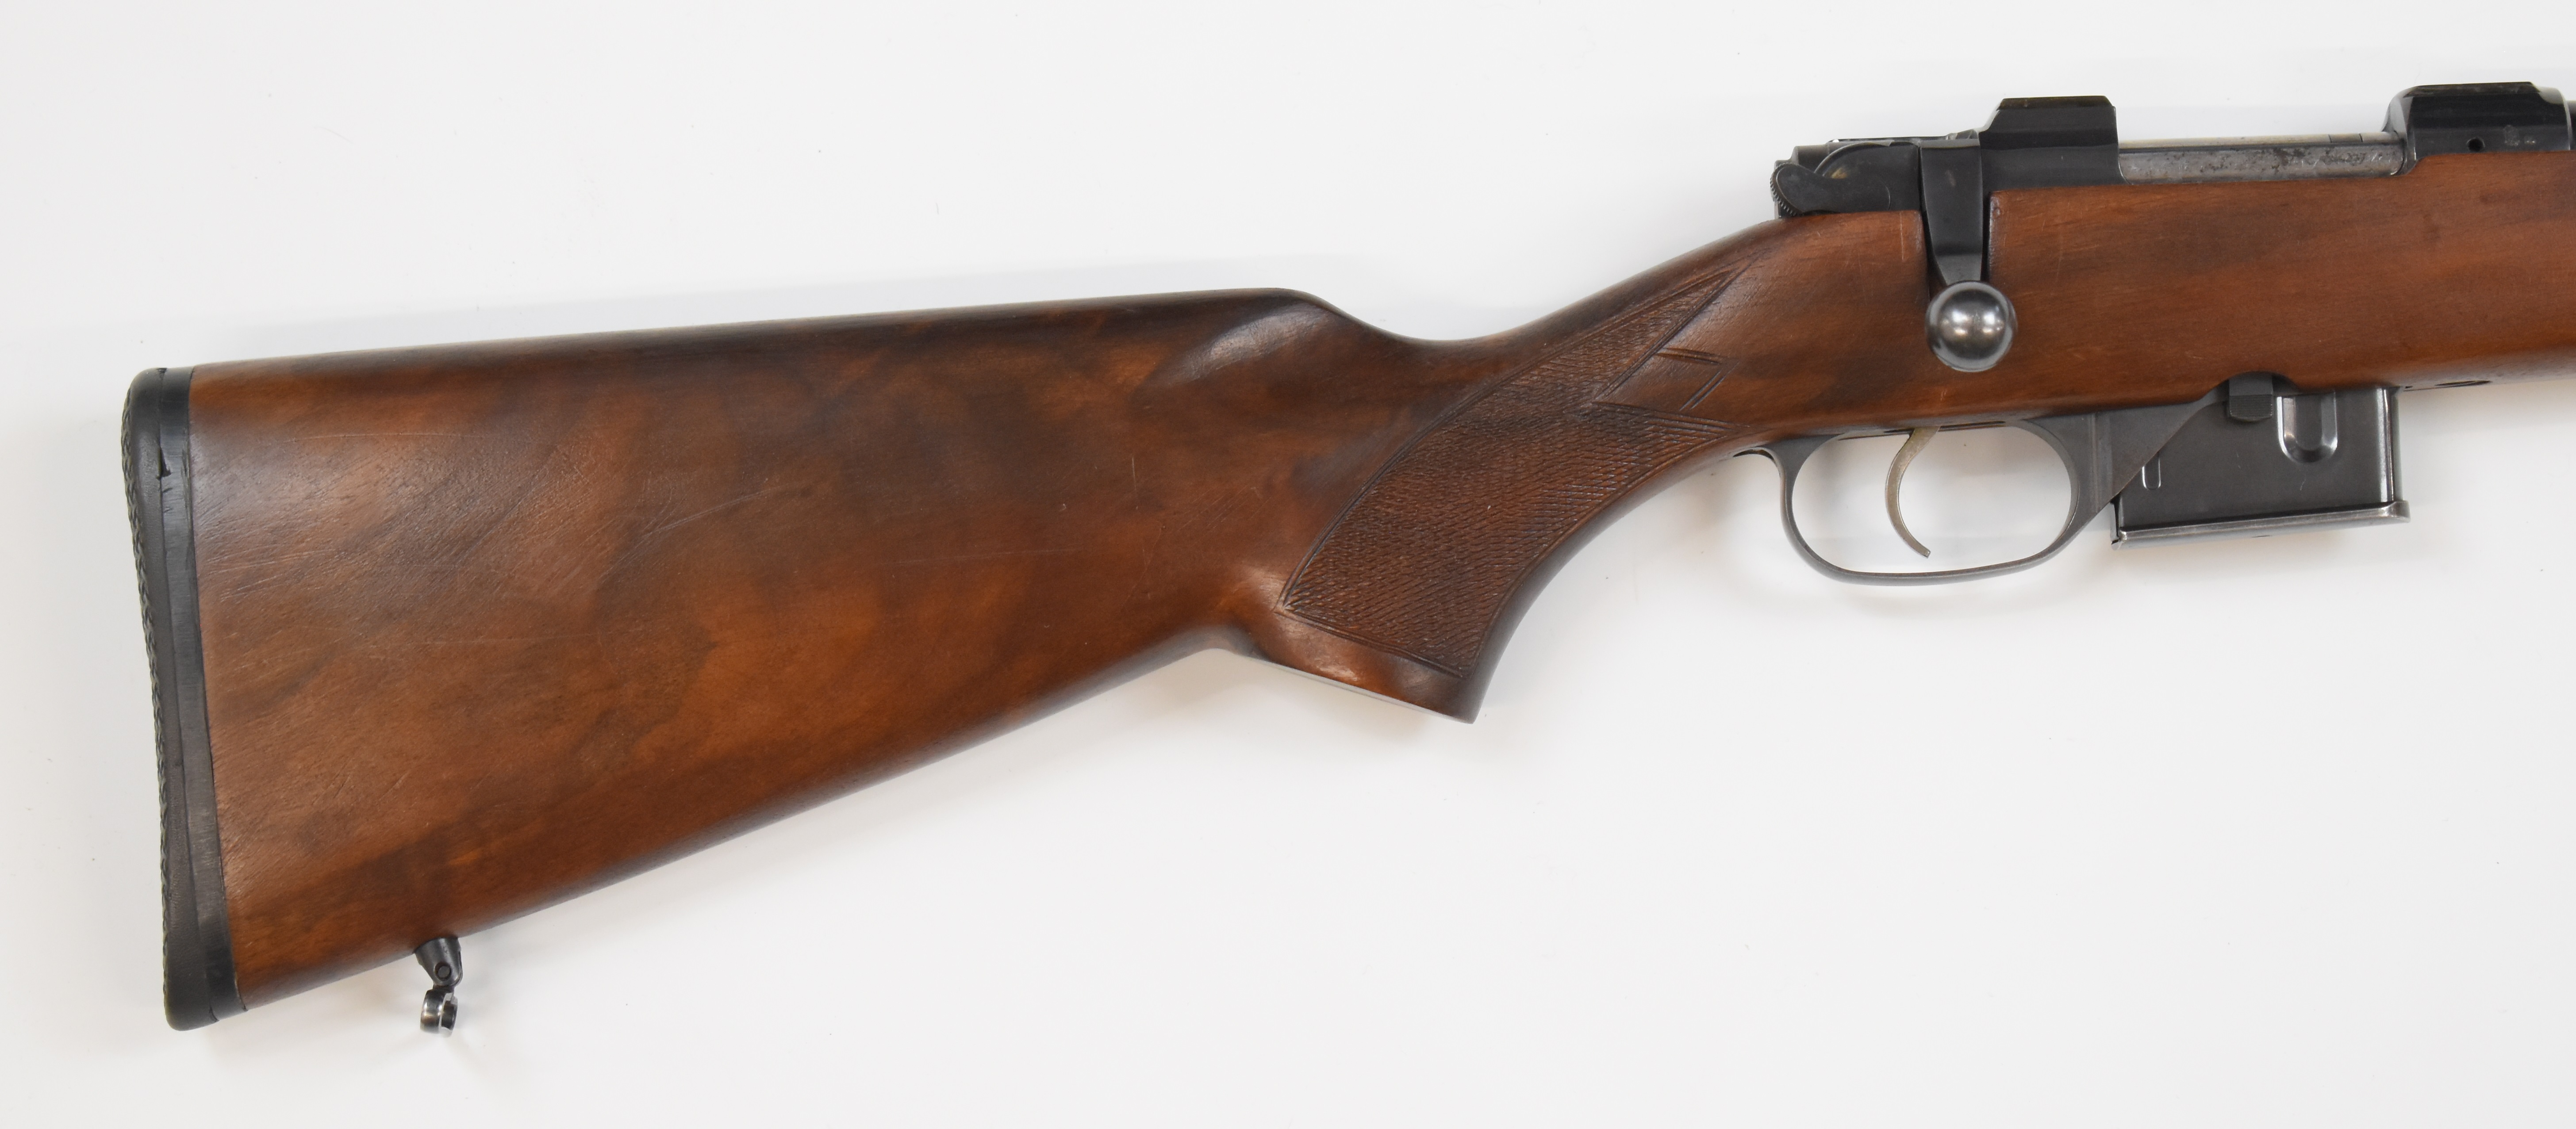 CZ 527 American .222 Remington bolt-action rifle with chequered semi-pistol grip and forend, sling - Image 3 of 10